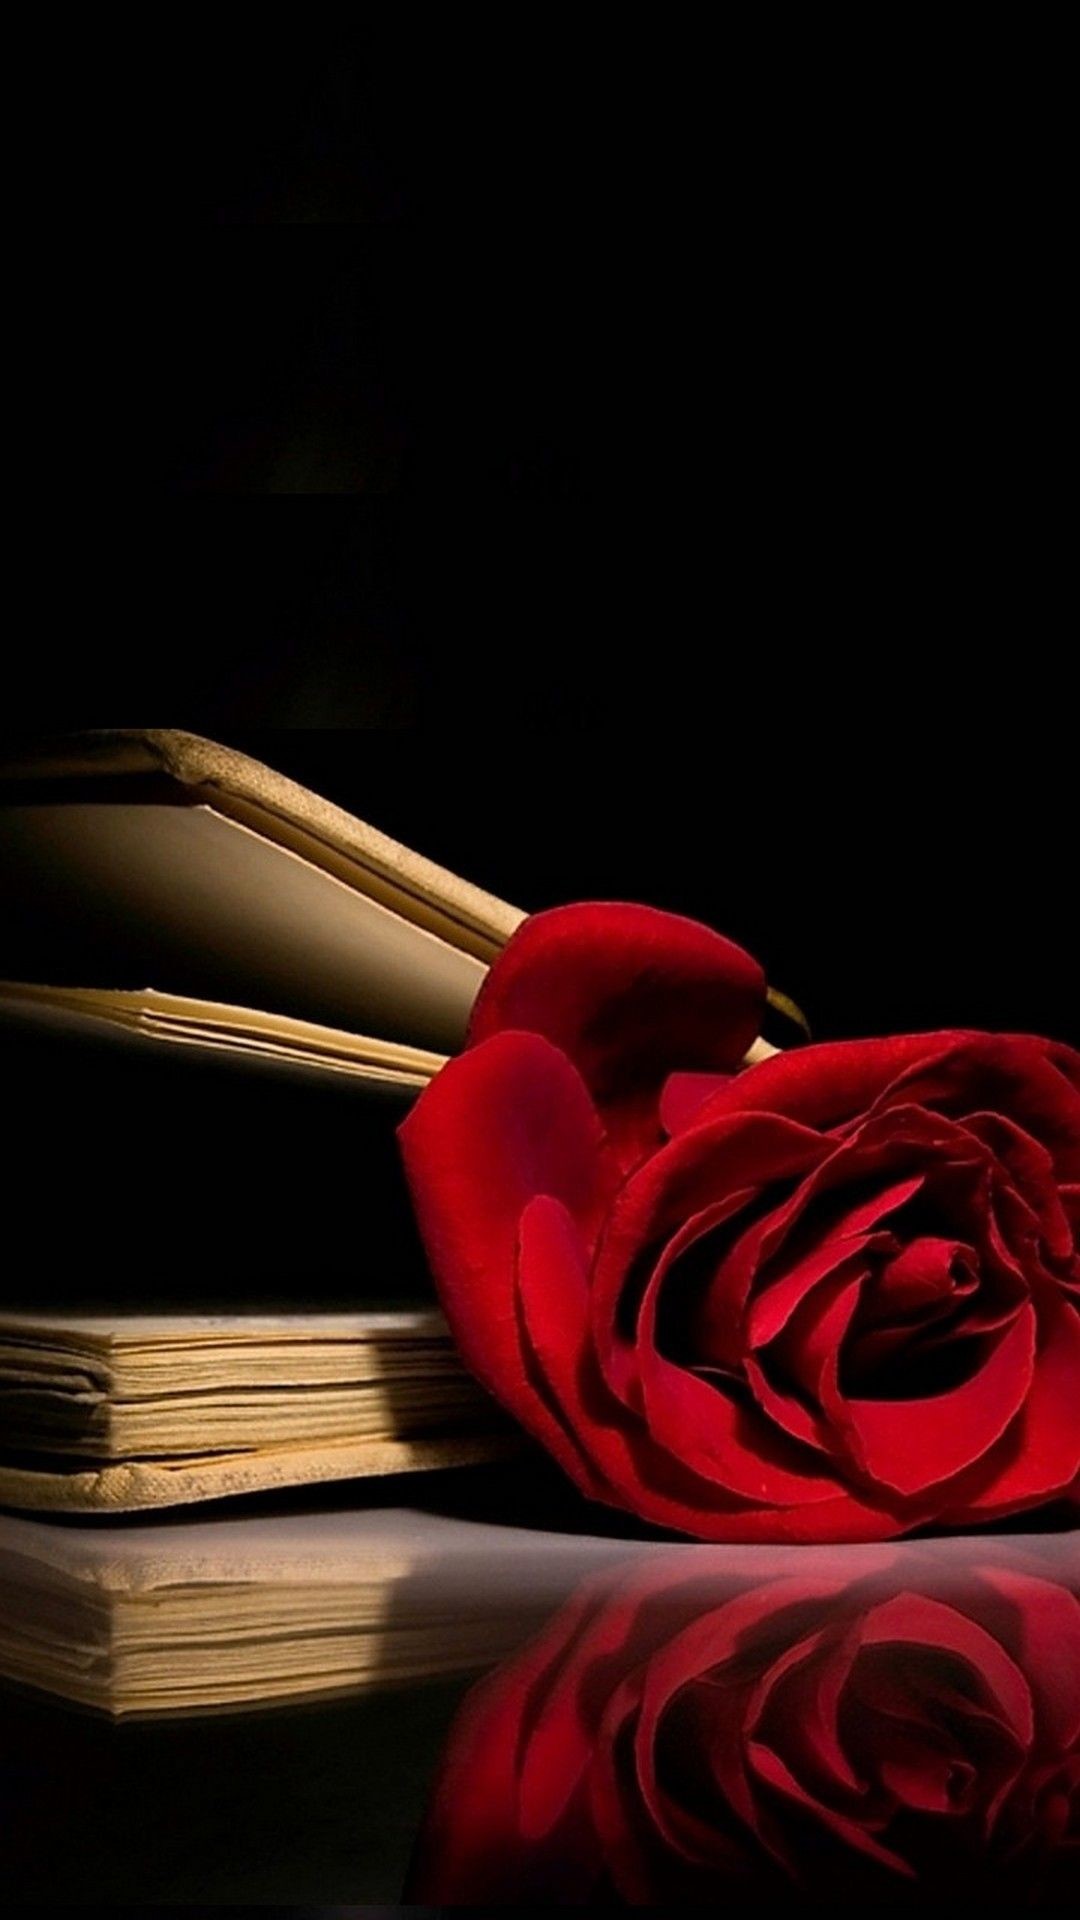 1080x1920 Red Rose Wallpaper iPhone | Best HD Wallpapers